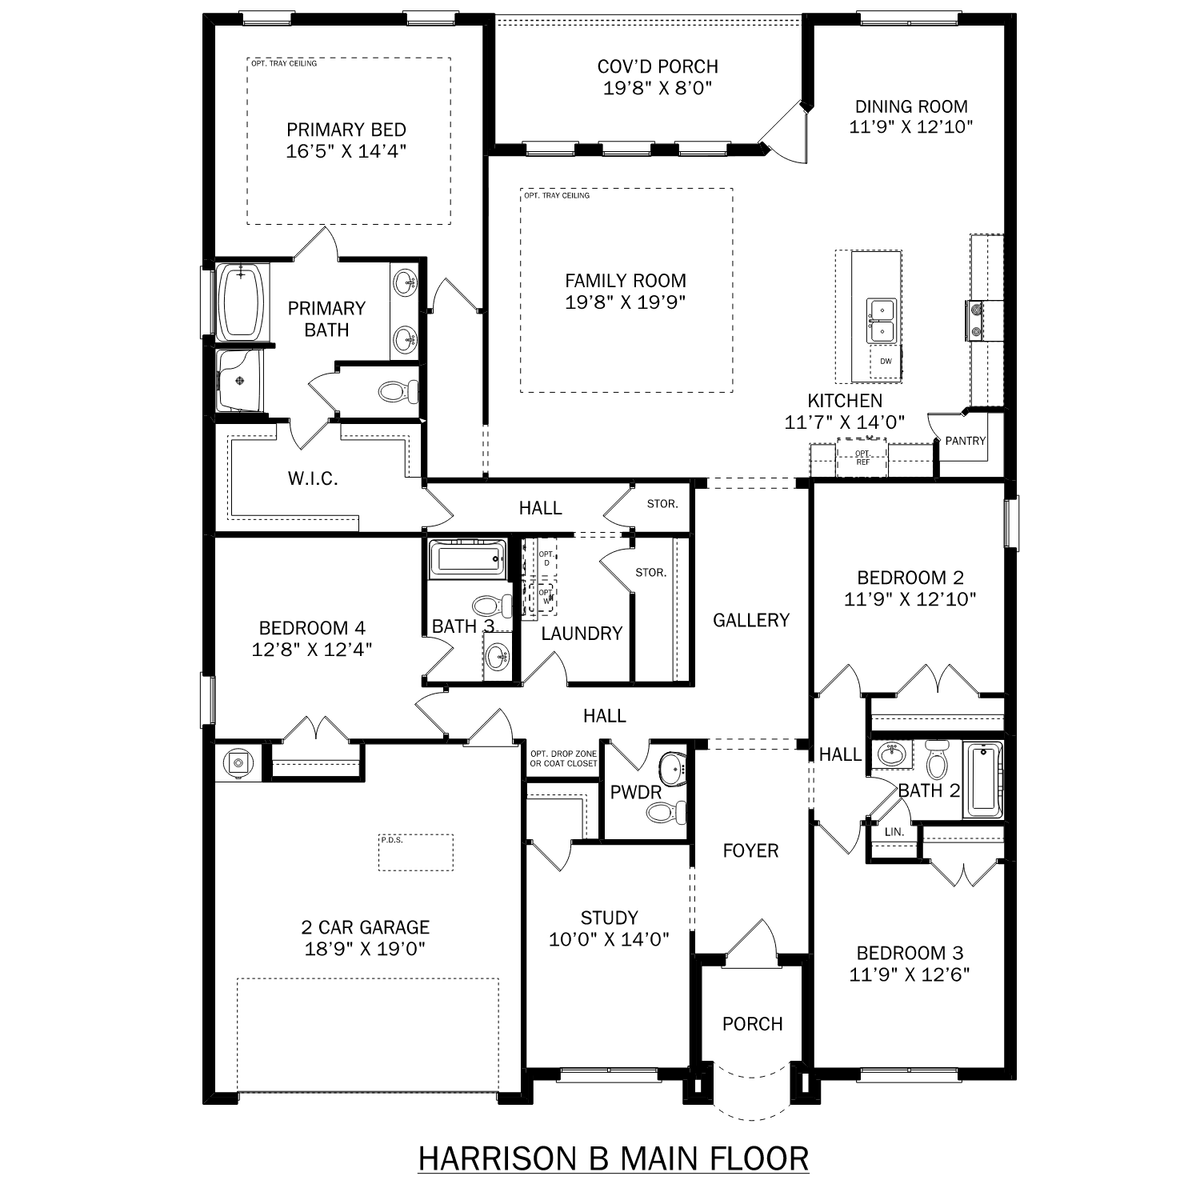 1 - The Harrison B buildable floor plan layout in Davidson Homes' Creekside community.